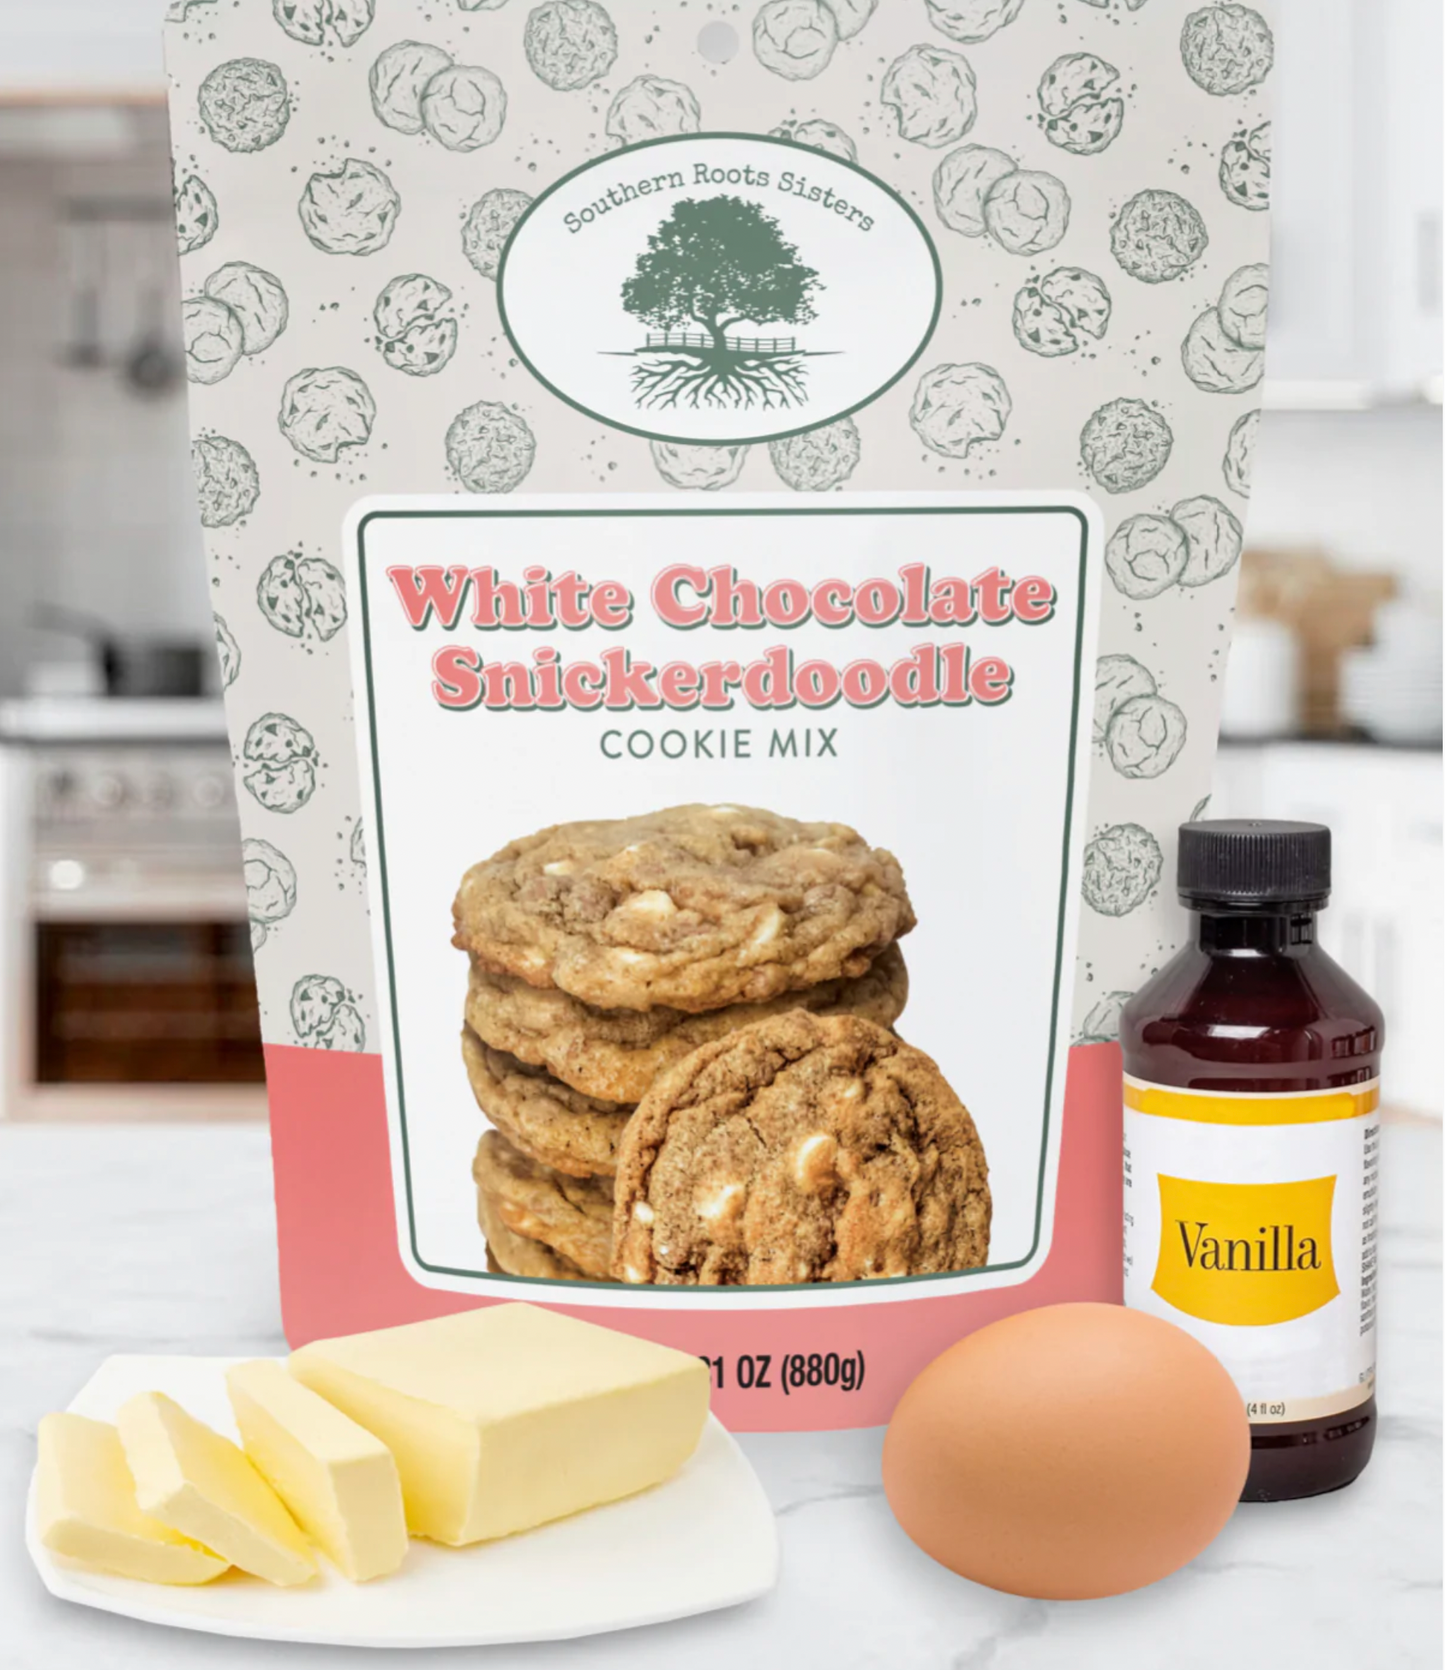 SOUTHERN ROOTS SISTERS WHITE CHOCOLATE SNICKERDOODLE COOKIE MIX